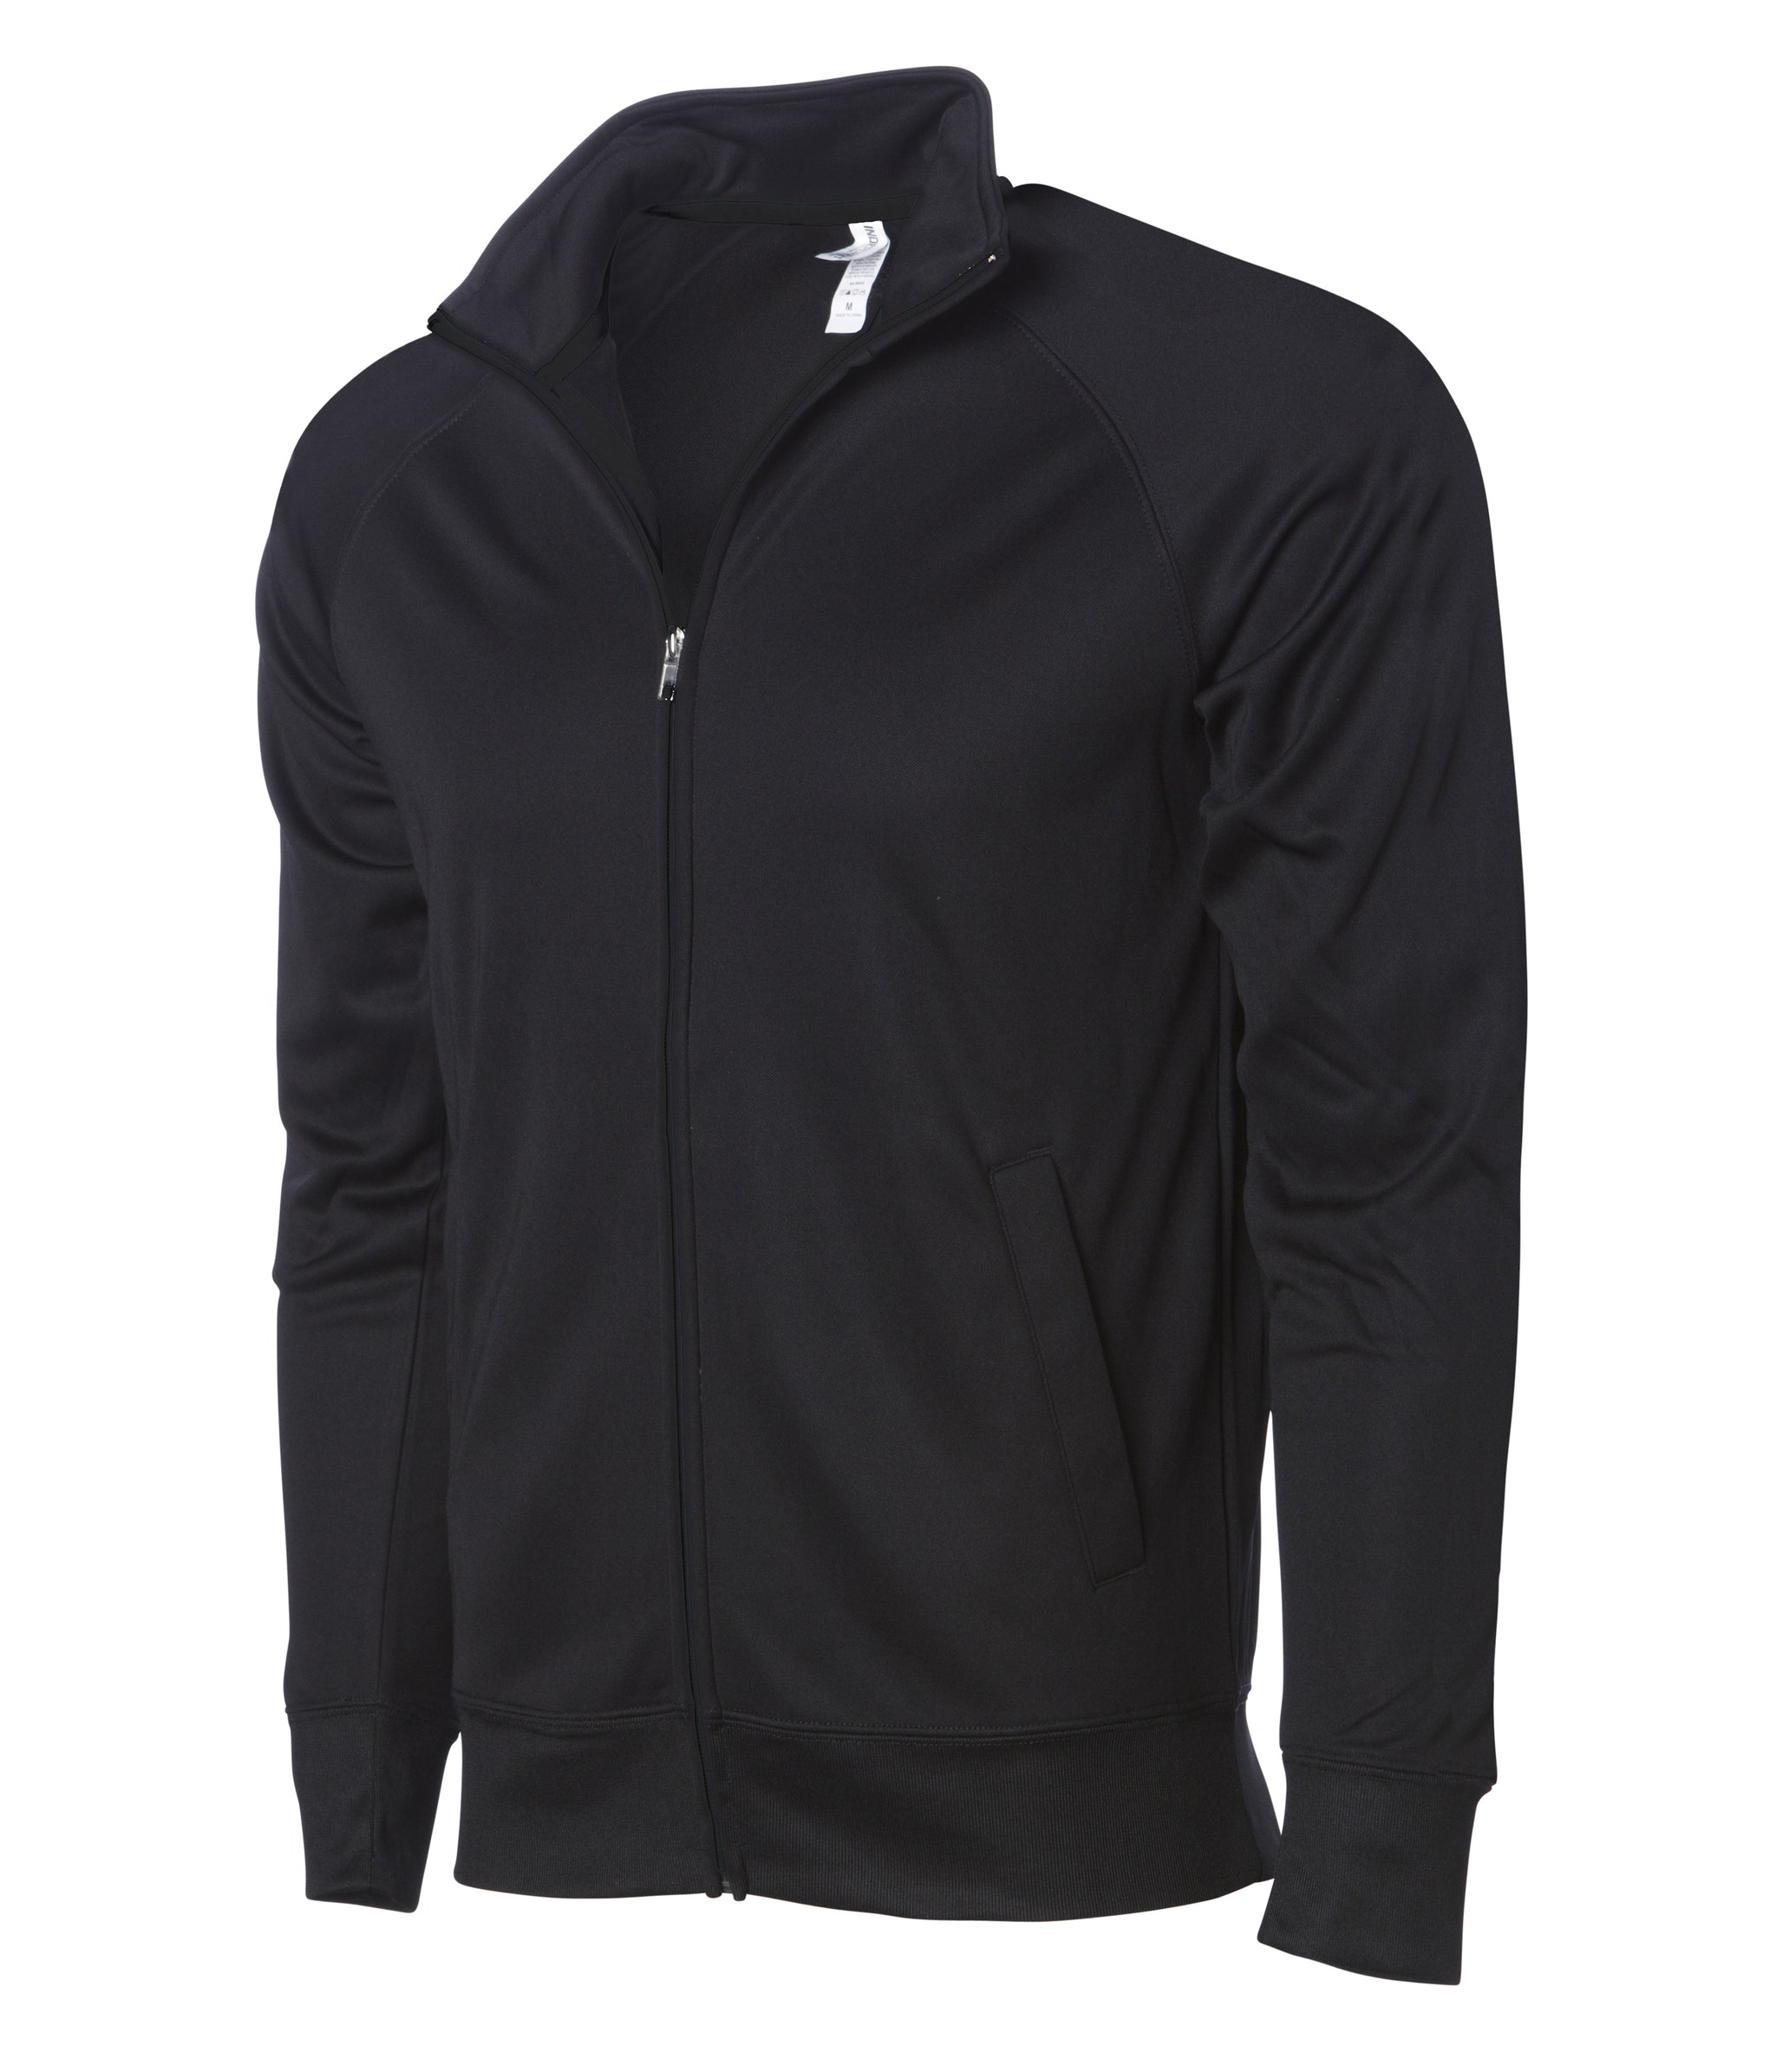 Unisex Lightweight Poly-Tech Track Jacket | Independent Trading Co 